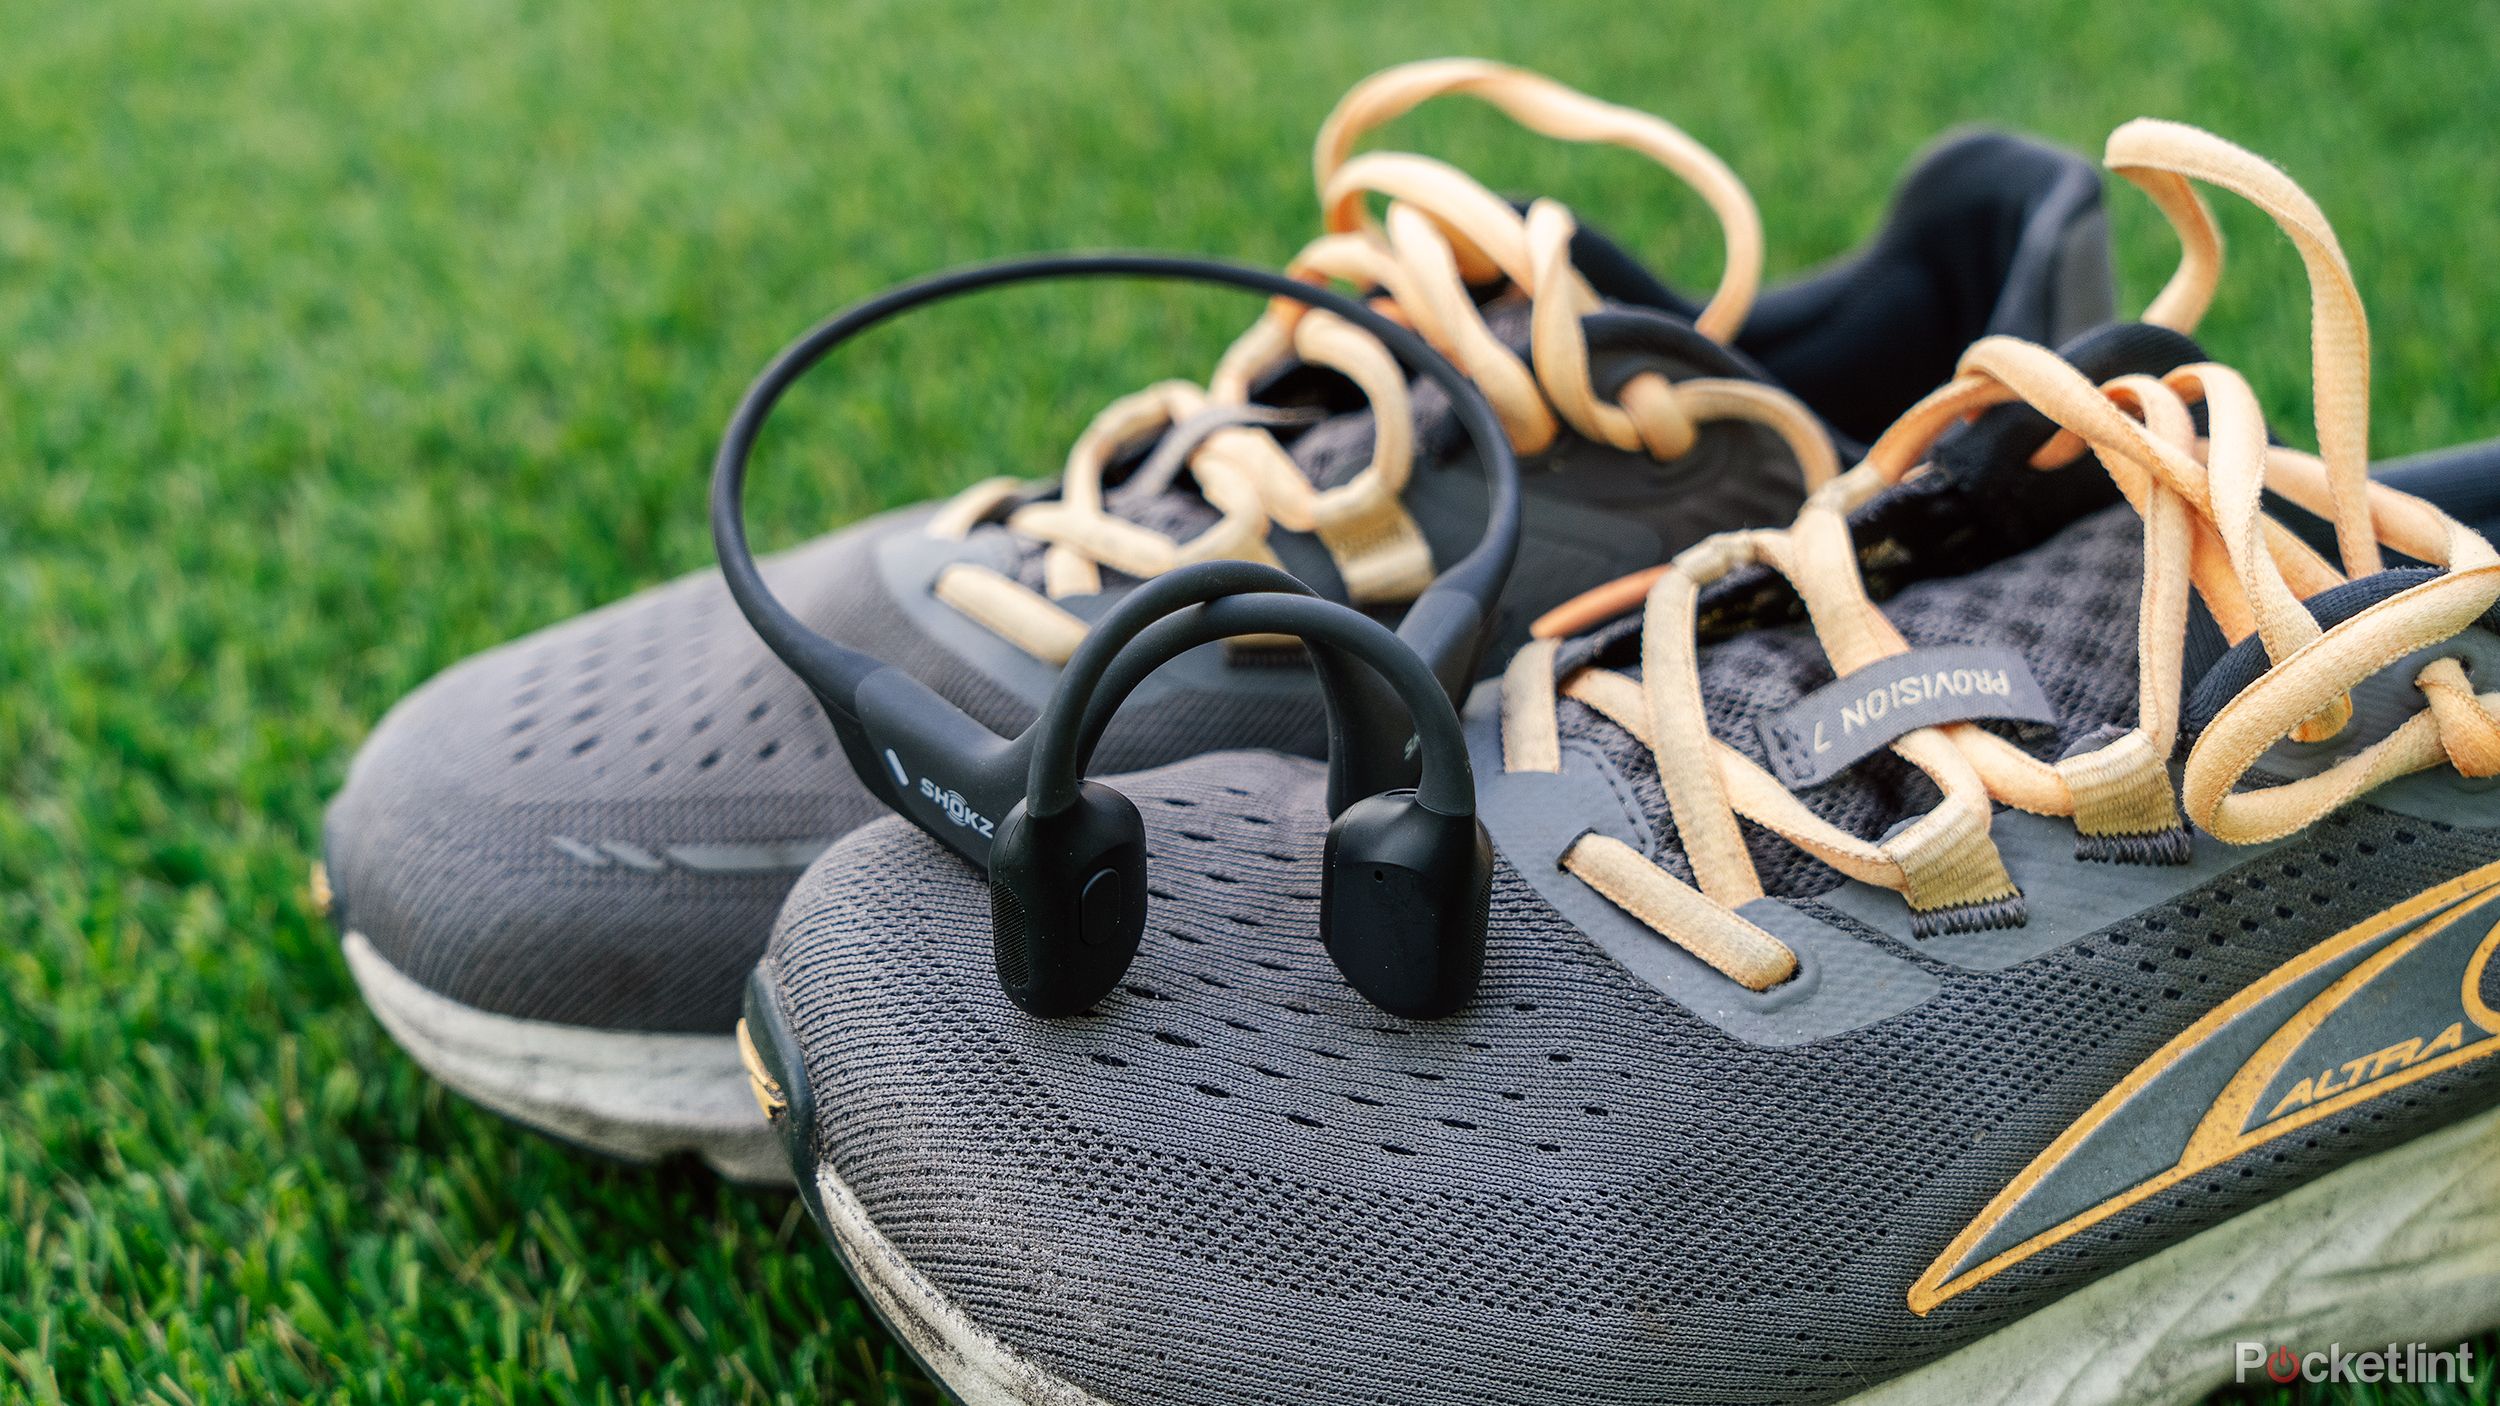 A pair of Shokz bone conduction headphones sits on a pair of gray running shoes. 